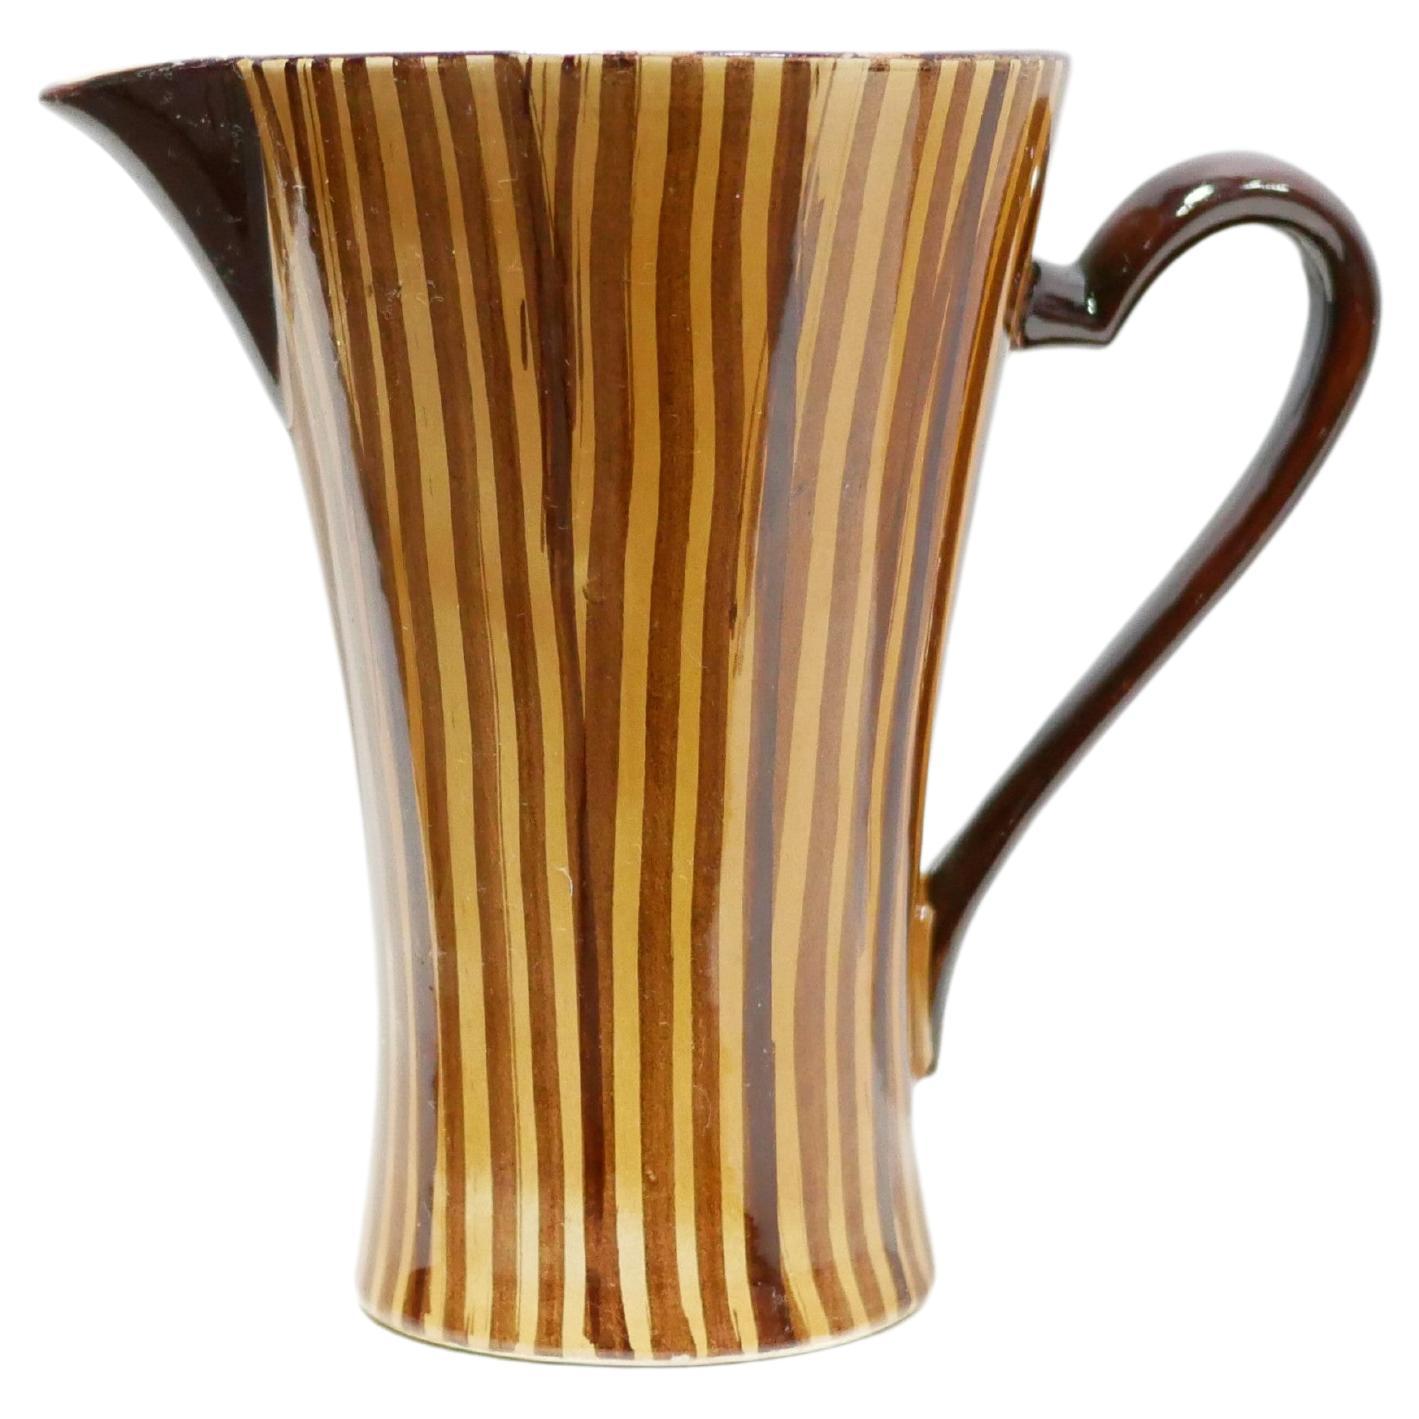 Vintage Ceramic Pitcher by the Sarreguemines Factory